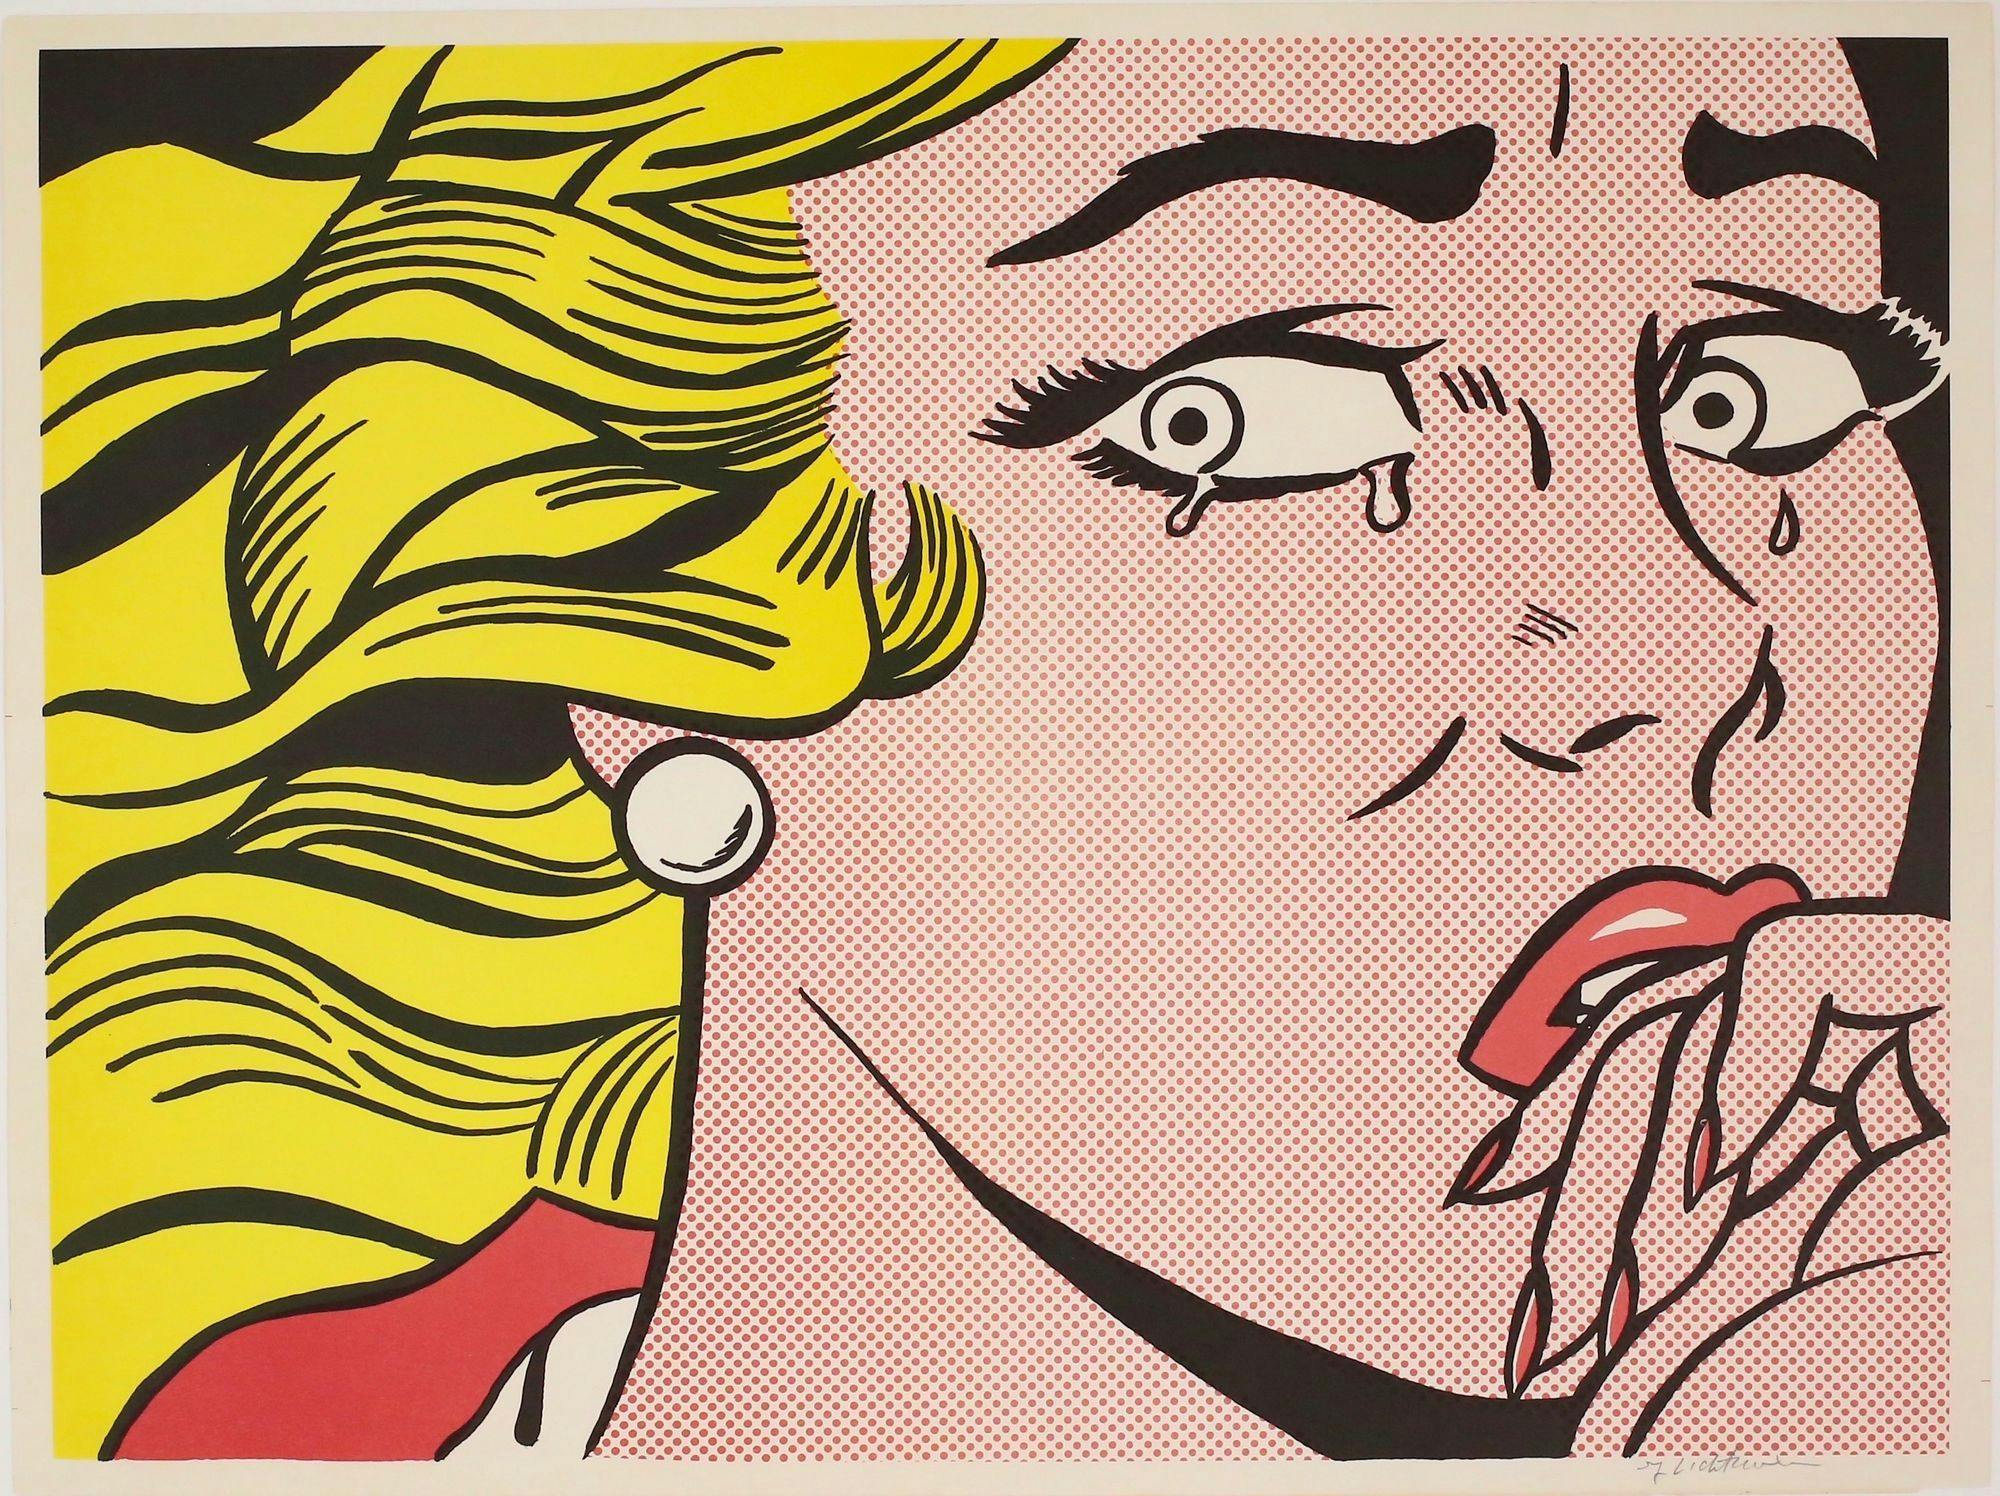 Image of Roy Lichtenstein's 1963 pop art piece “Crying Girl", depicting a woman looking nervous & upset with tears in her eyes (image via WikiArt, fair use)